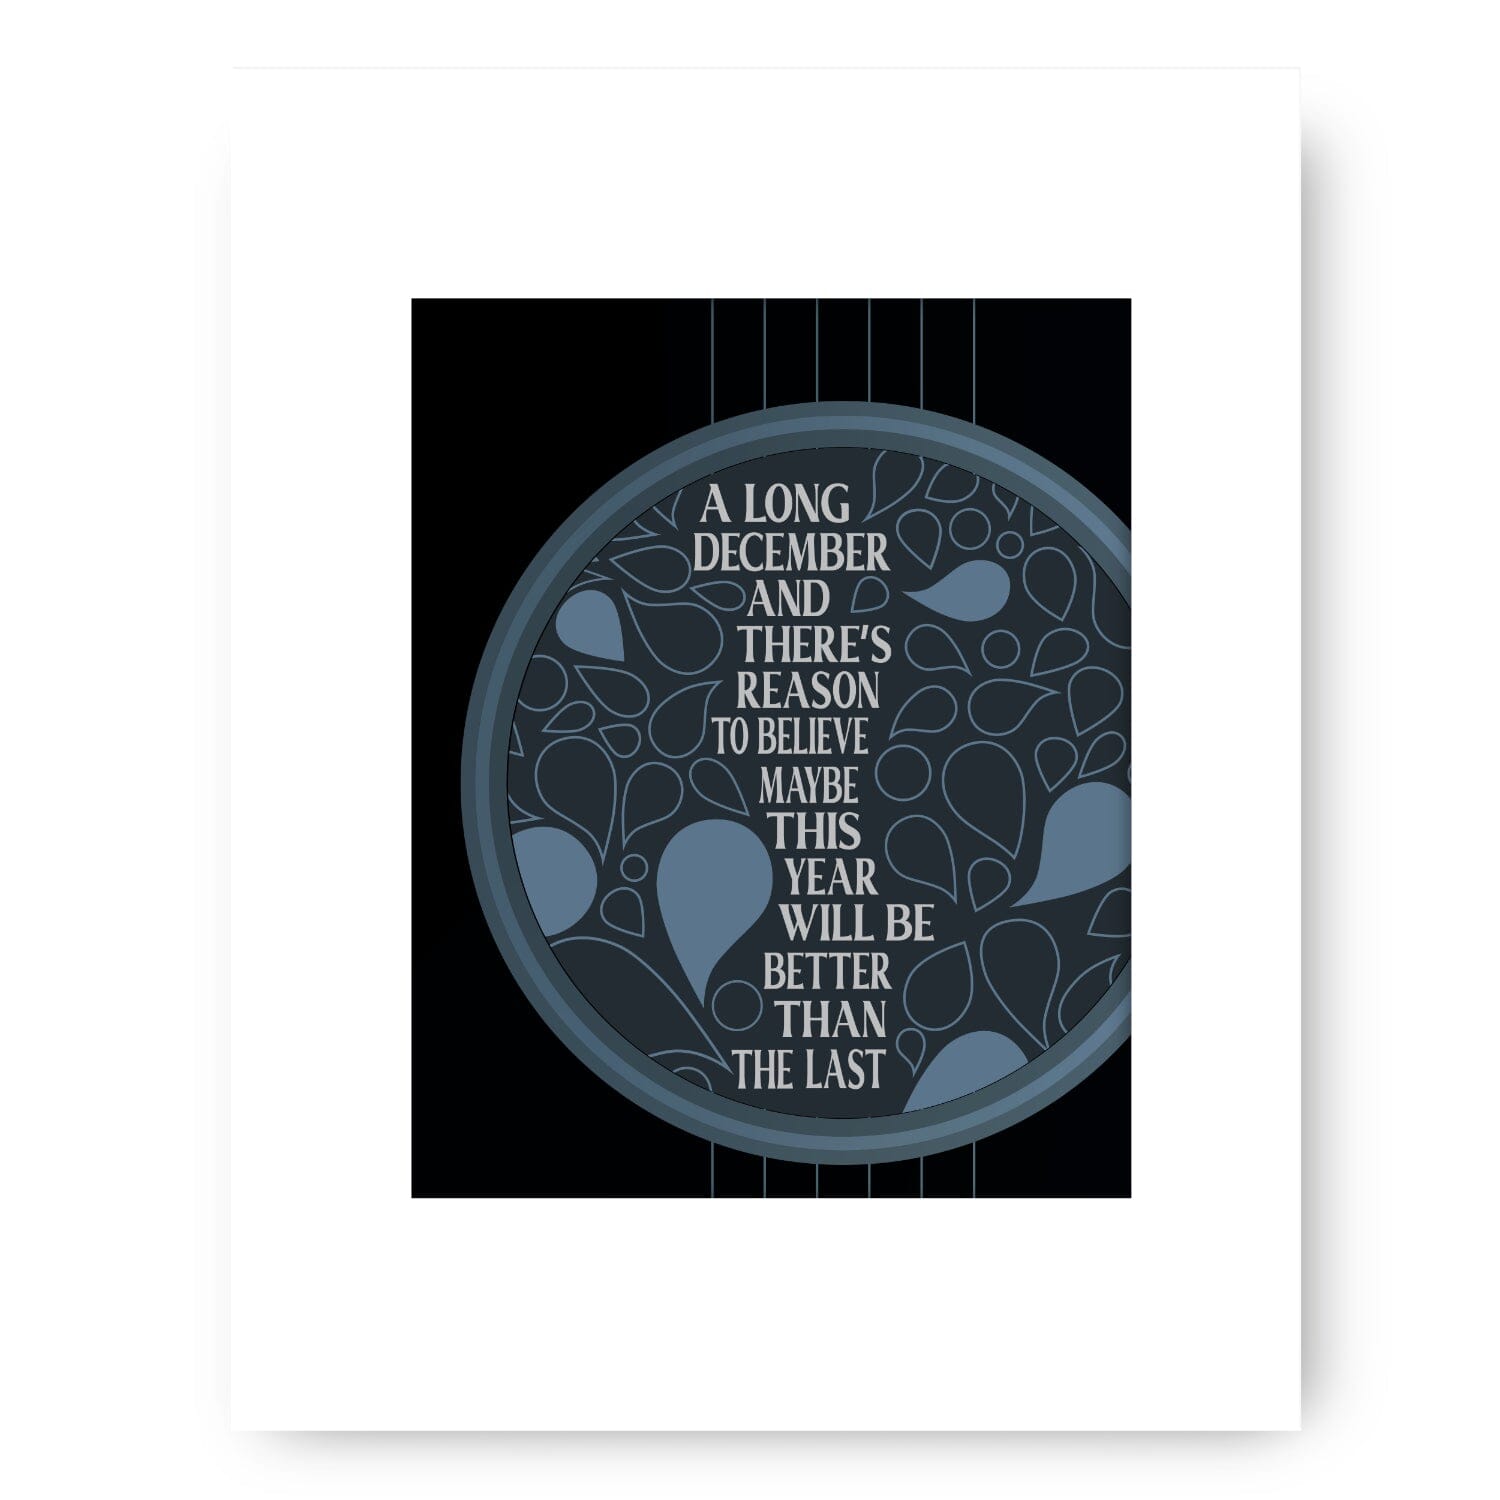 A Long December by the Counting Crows - Song Lyric Print Song Lyrics Art Song Lyrics Art 8x10 White Matted Unframed Print 